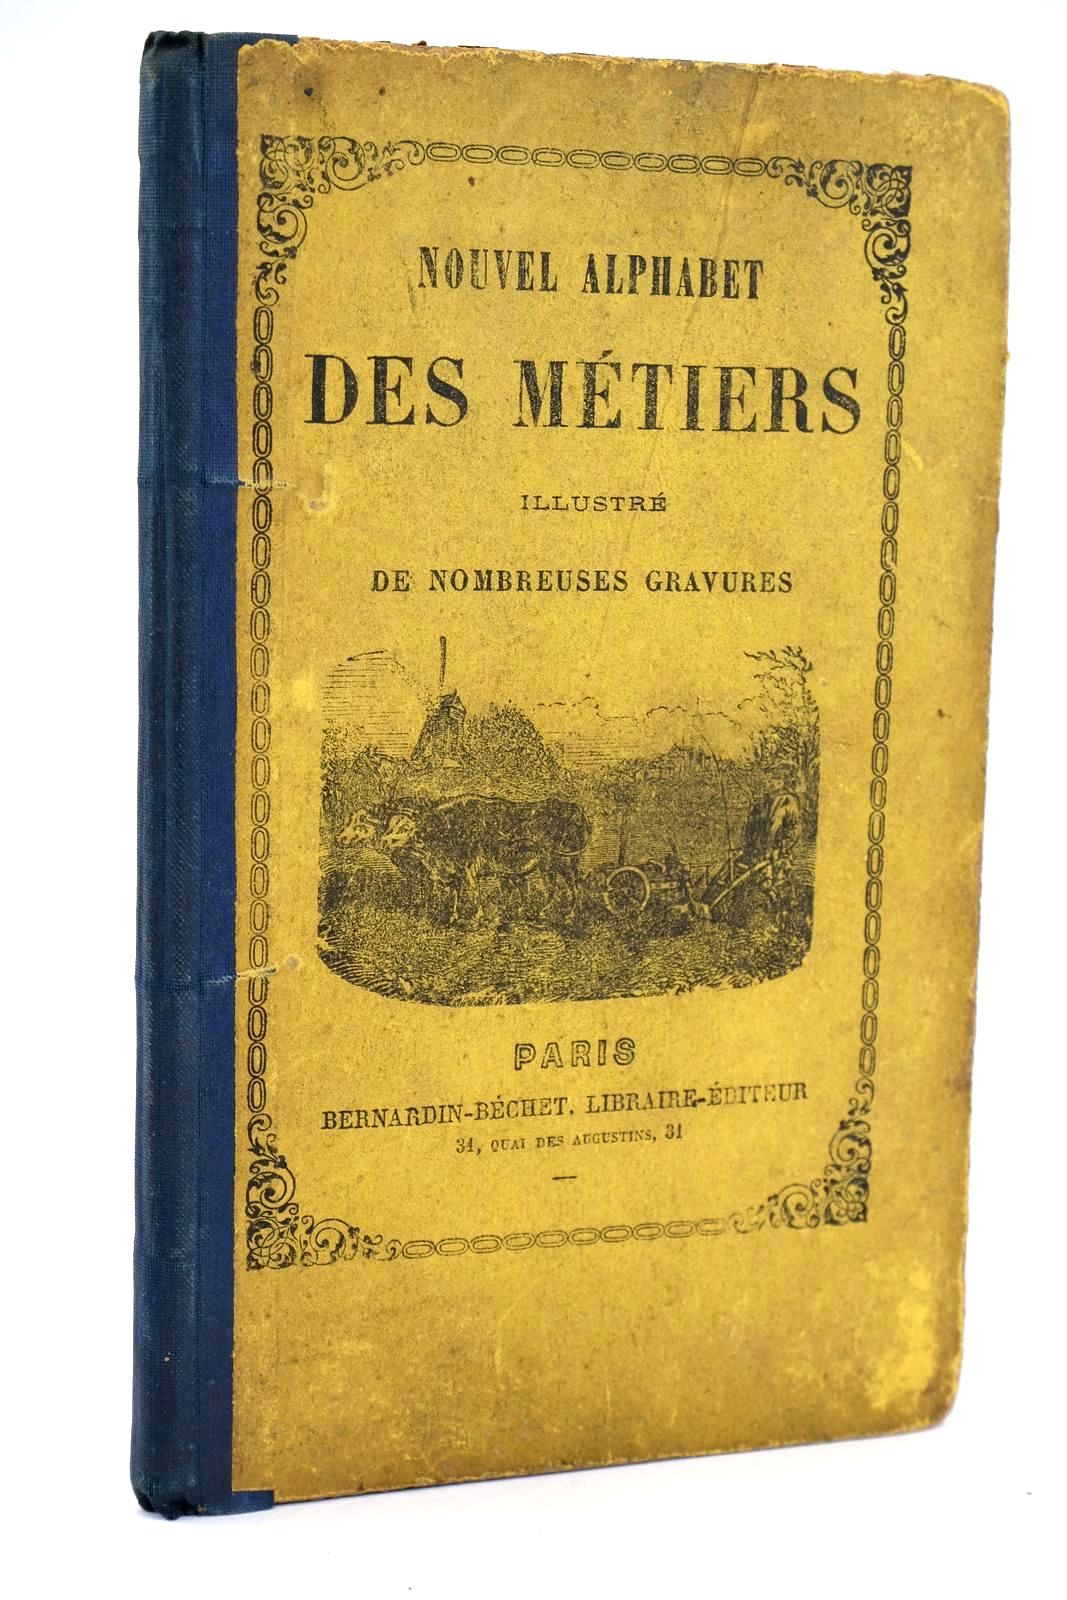 Photo of NOUVEL ALPHABET DES METIERS published by Bernardin-Bechet (STOCK CODE: 1319309)  for sale by Stella & Rose's Books